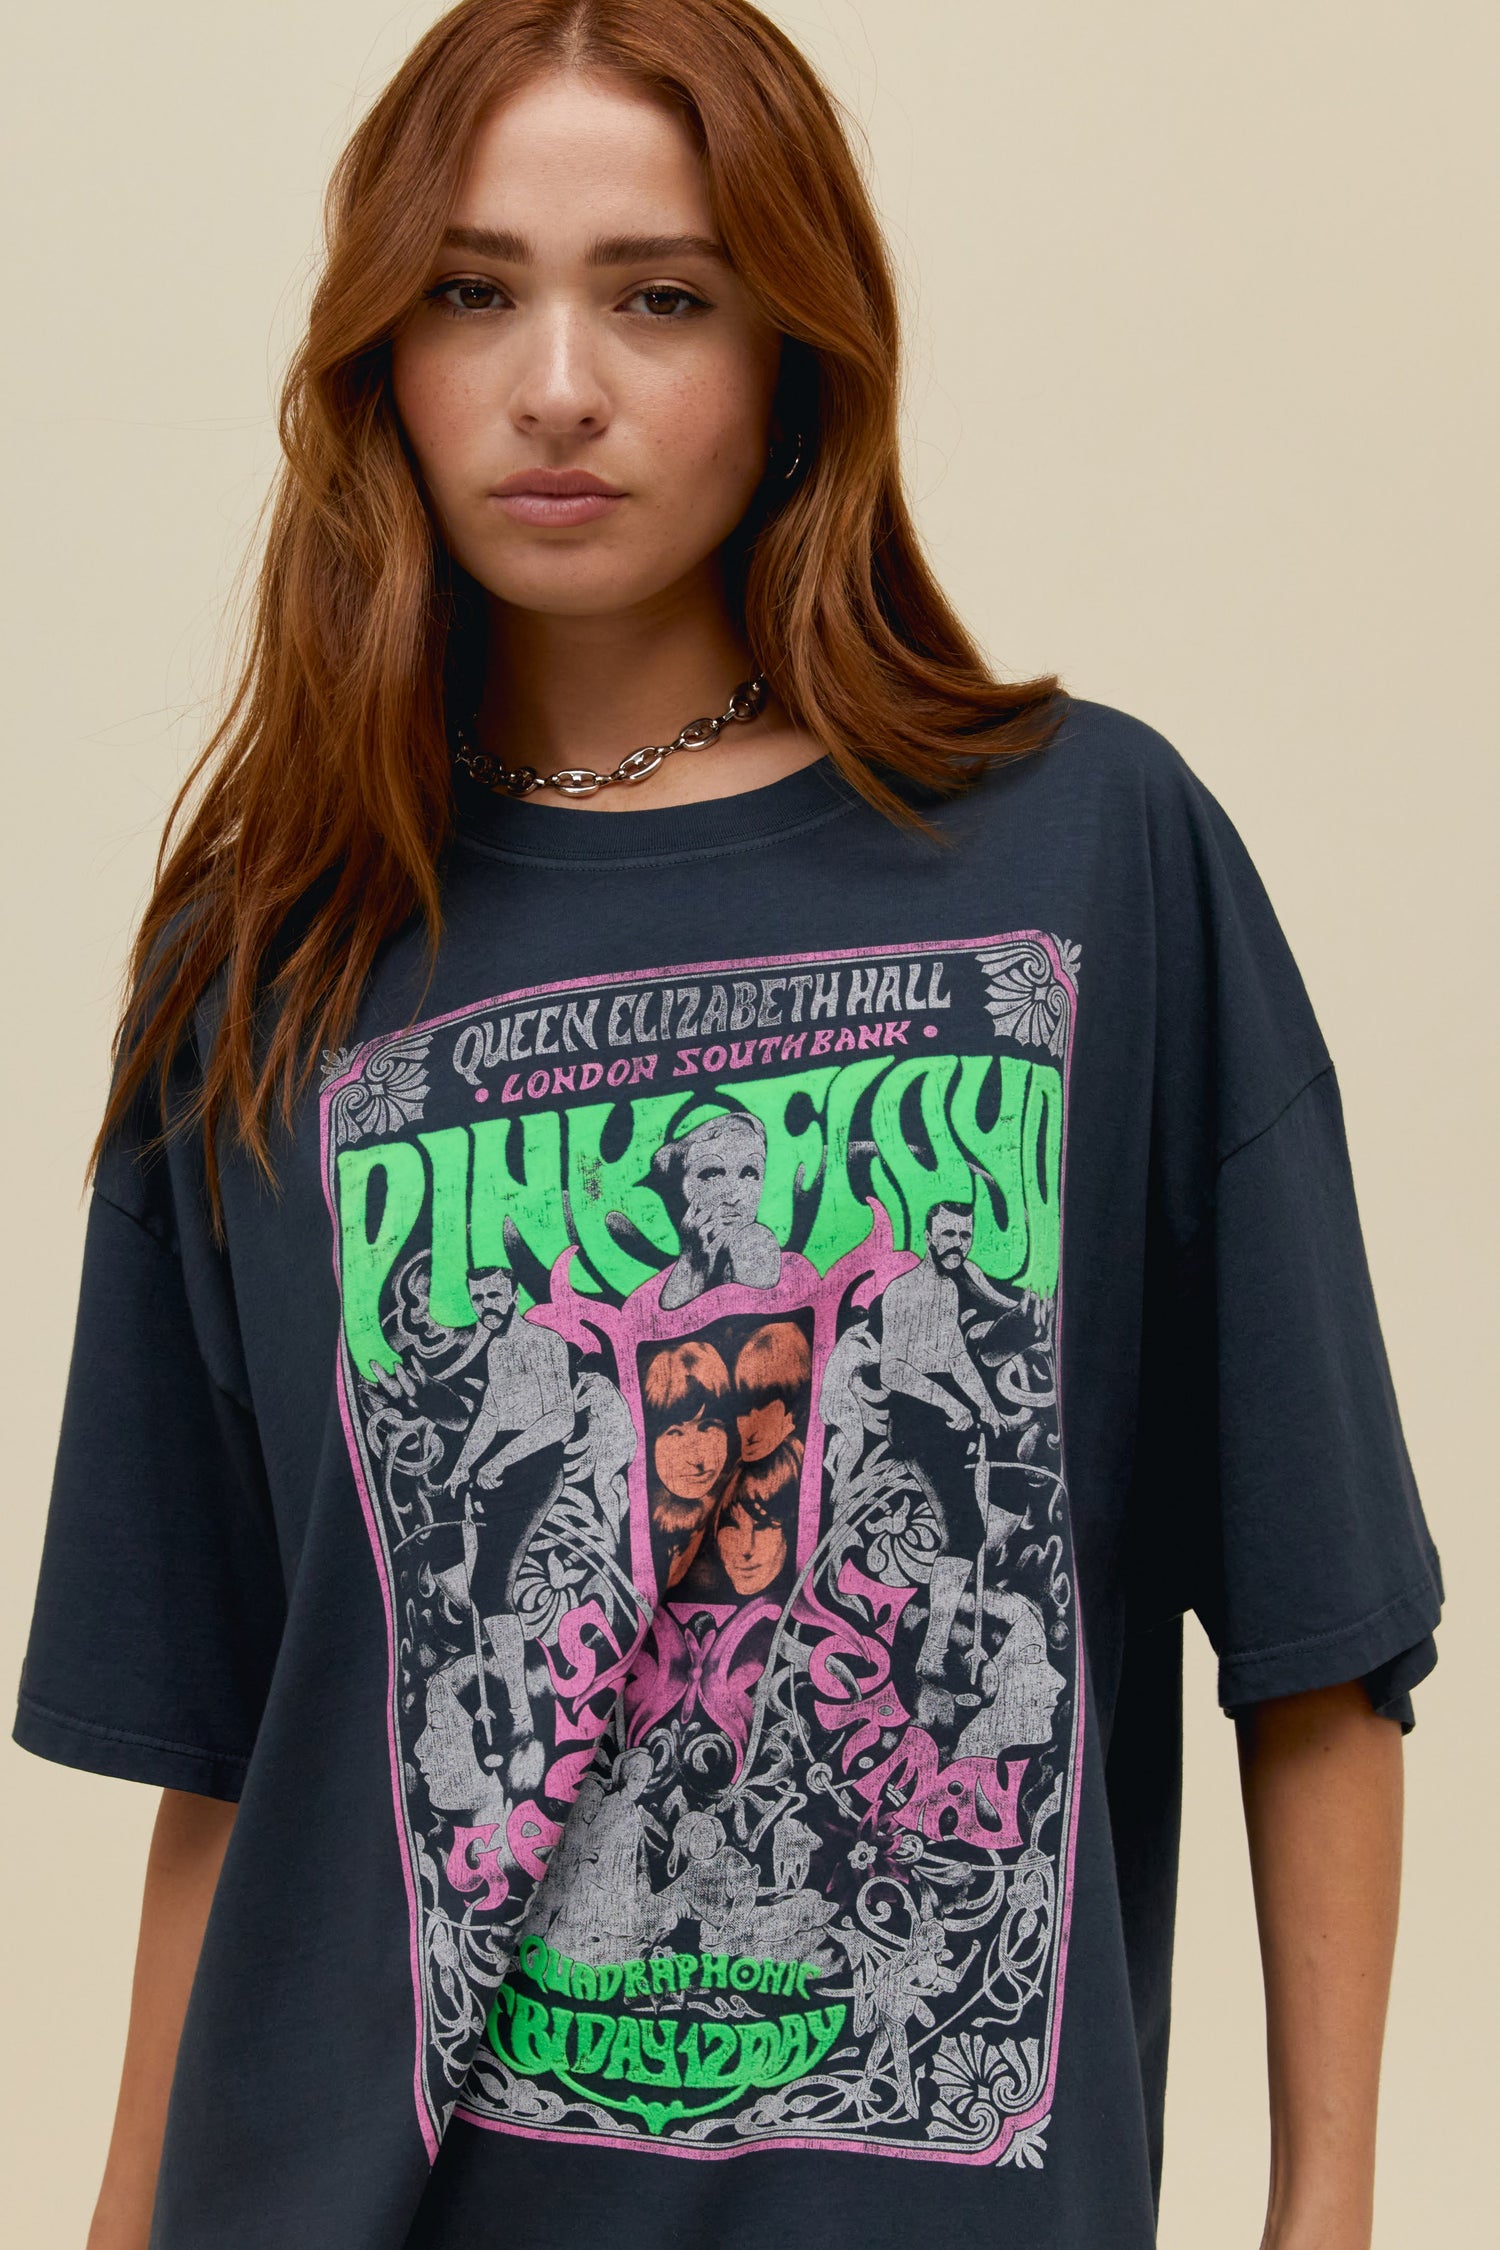 A straight-haired model featuring a stamp stamped with 'Pink Floyd' and designed with a poster featuring the faces of the group.